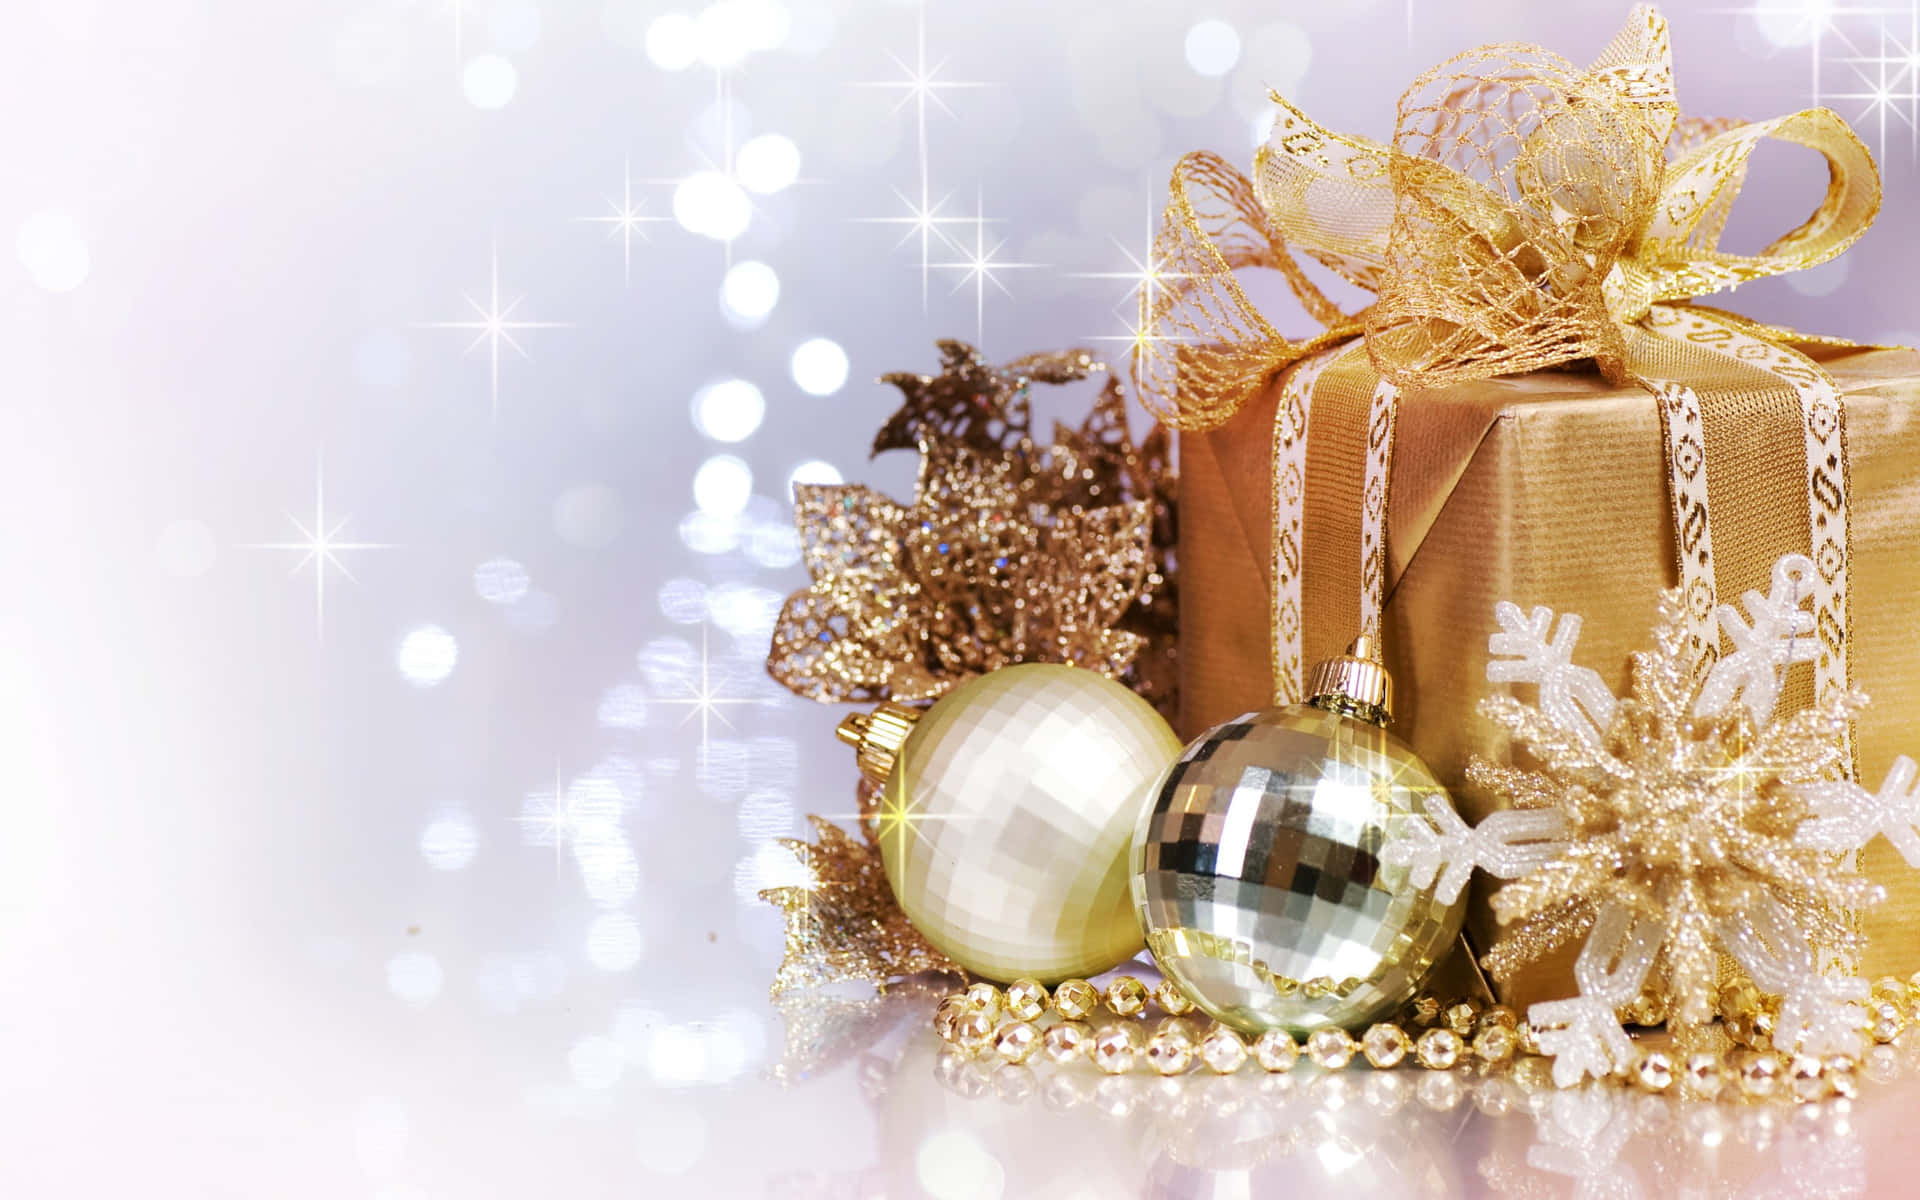 Bring a sparkle to your holiday with a gold Christmas!